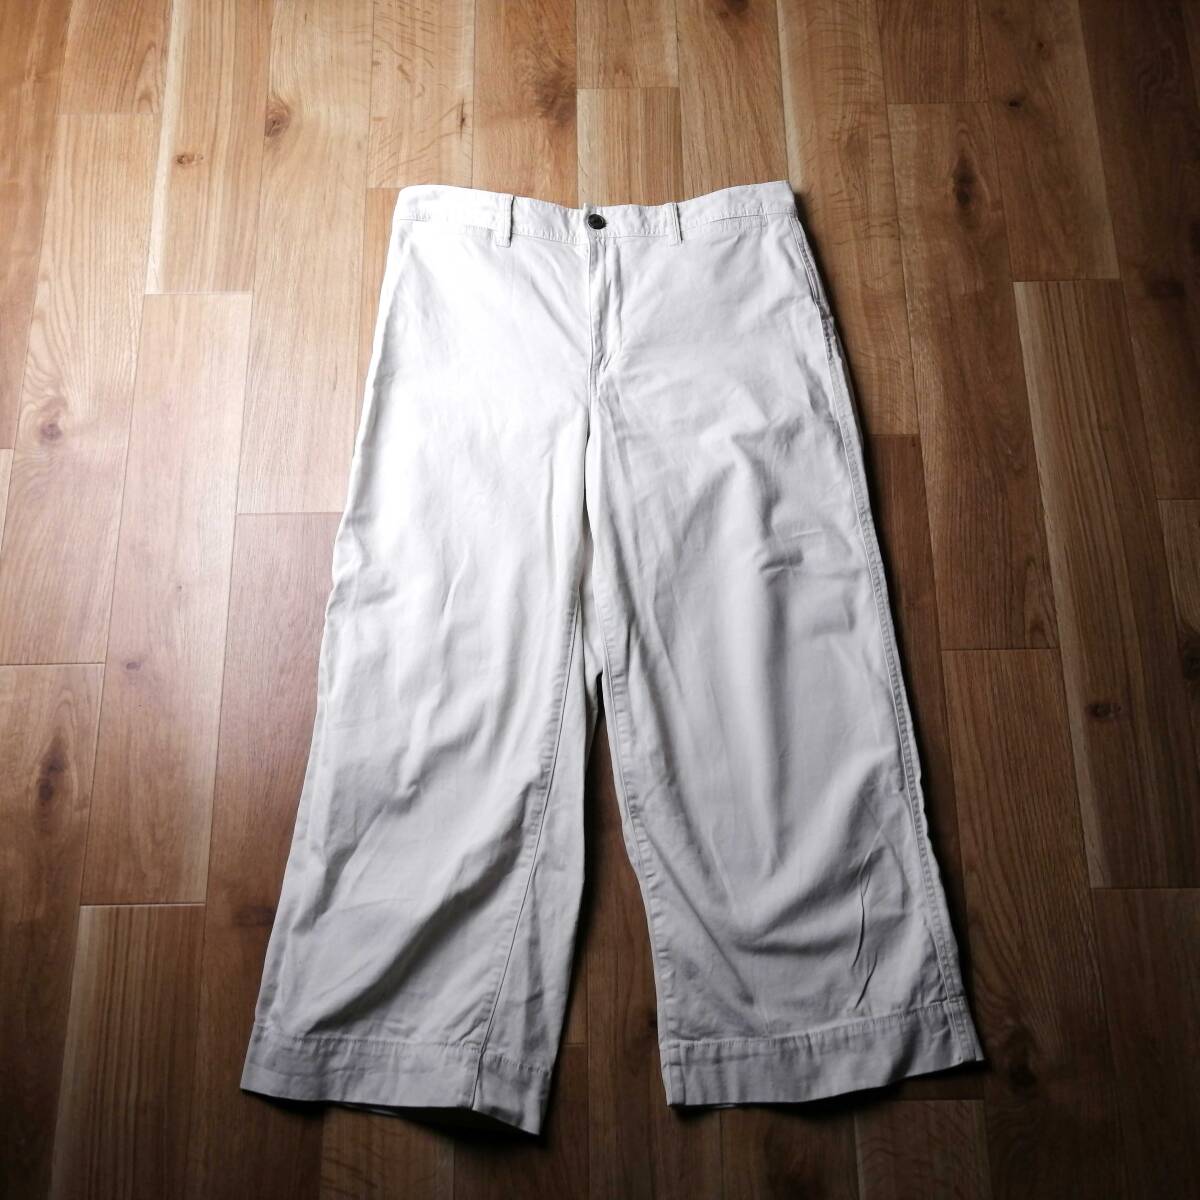 GAP Gap wide pants cotton pants size 12 24-0422fu05[4 point including in a package free shipping ]